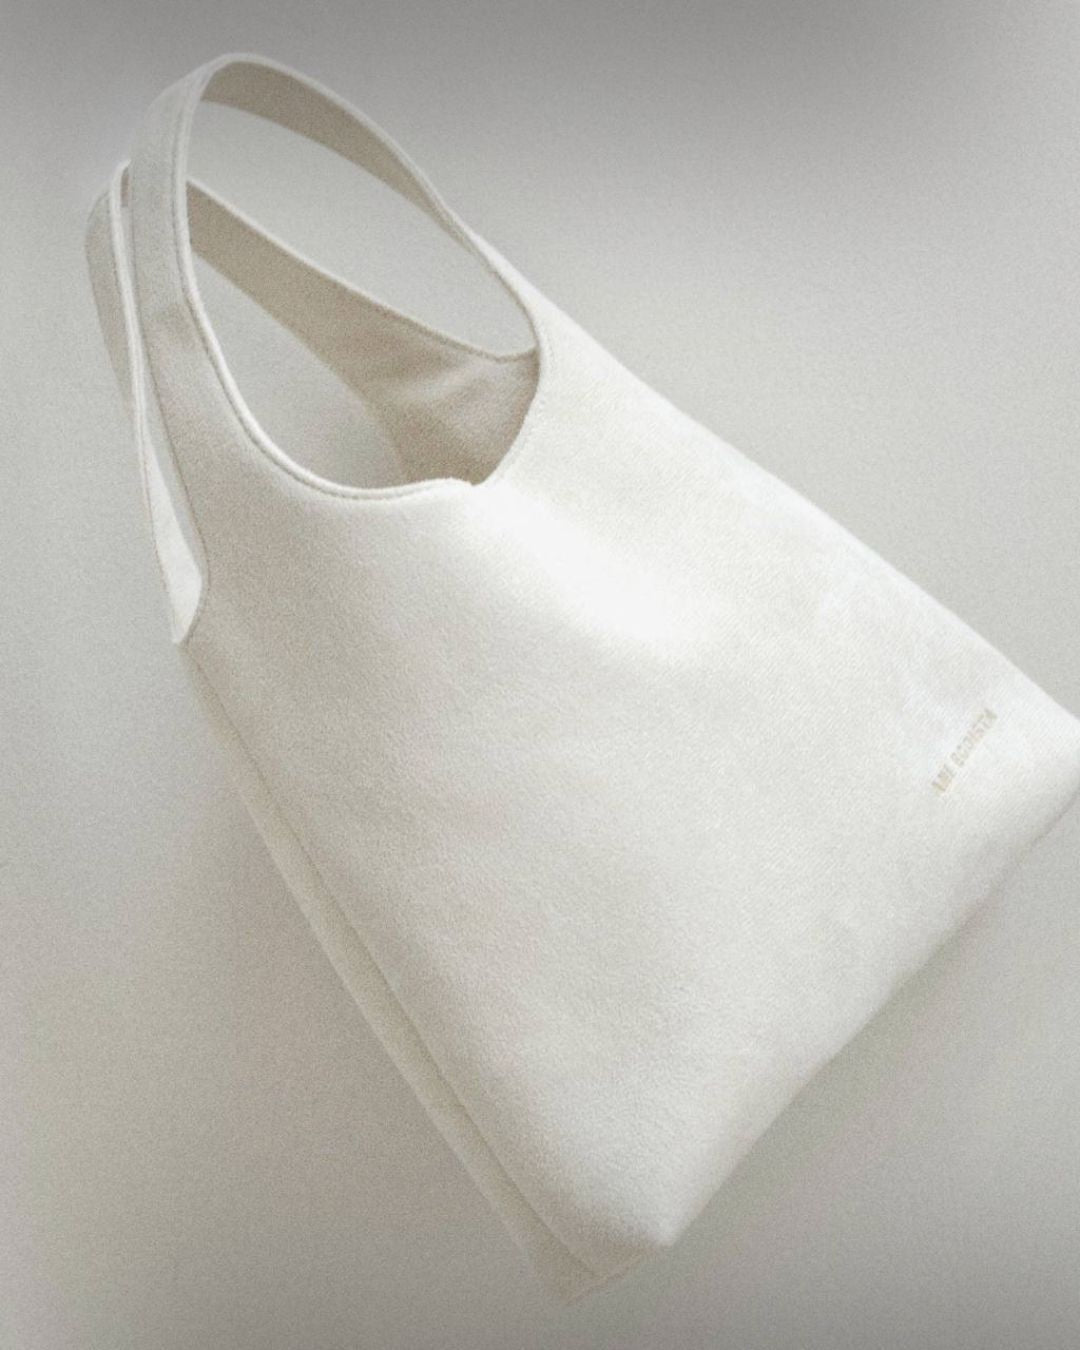 White reusable bag by Enso Design Lab, designed by Ani Han. The bag emphasizes sustainability and minimalist design, perfect for everyday use.